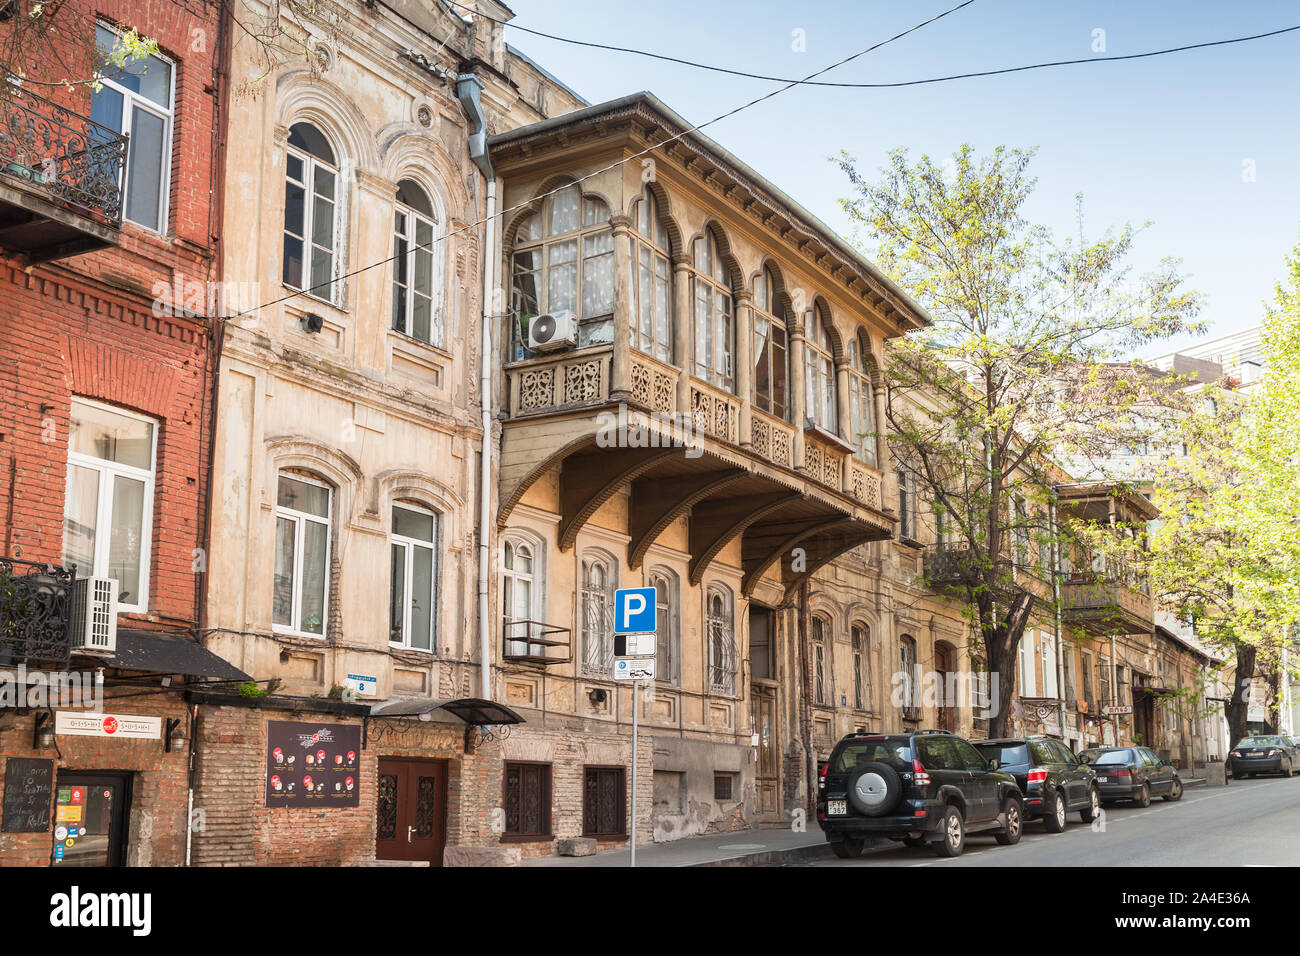 Tbilisi, Georgia - April 28, 2019: Tbilisi street view with cars parked near old living houses with traditional carved wooden balconies Stock Photo